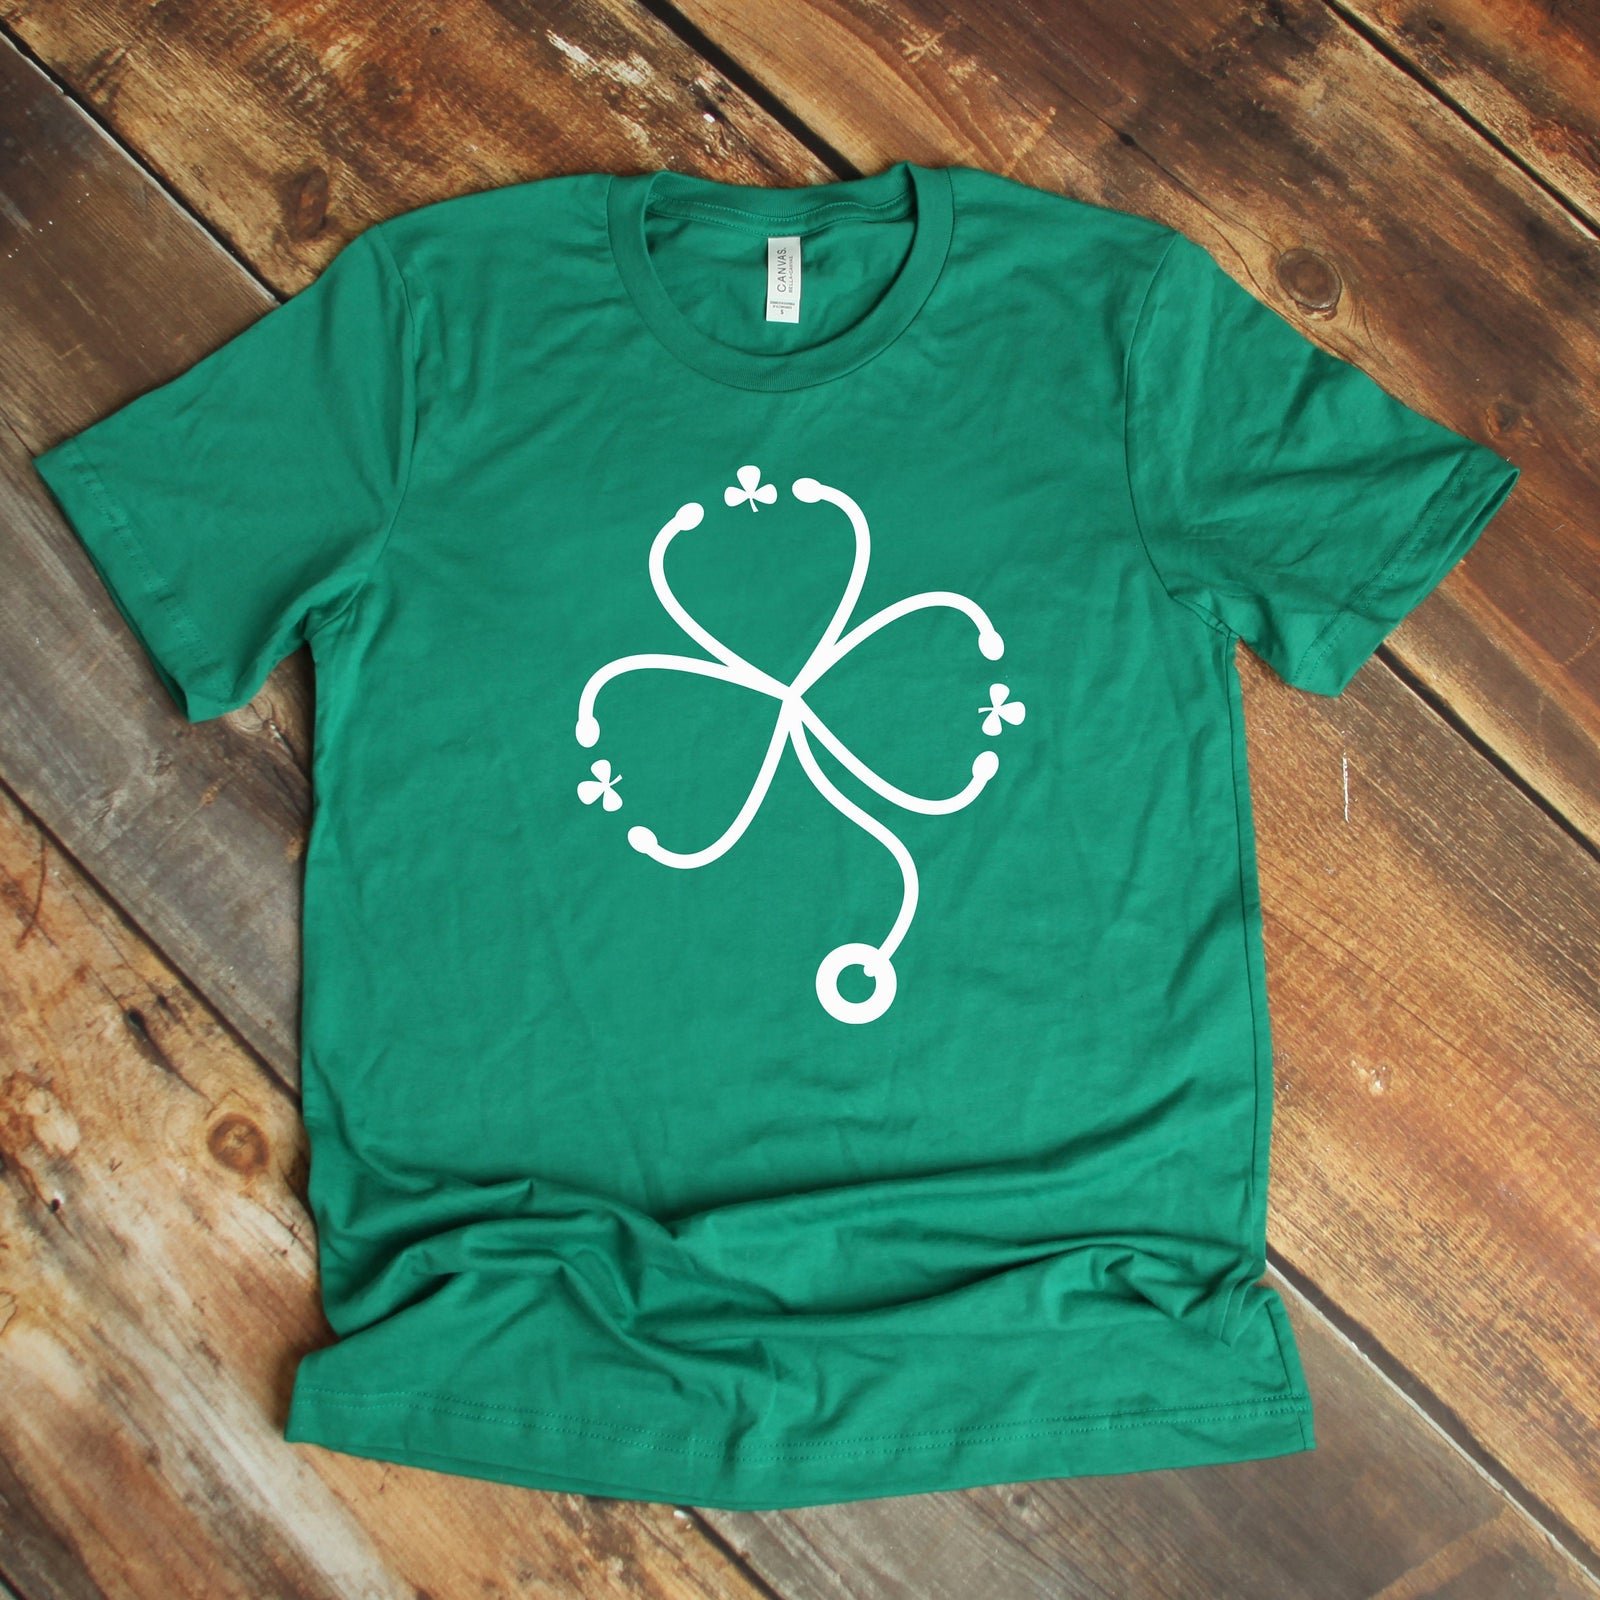 Lucky Nurse or Doctor T Shirt - St. Patrick's Day Shirt - Clover Stethoscope - Green Irish Luck - Health Care Worker